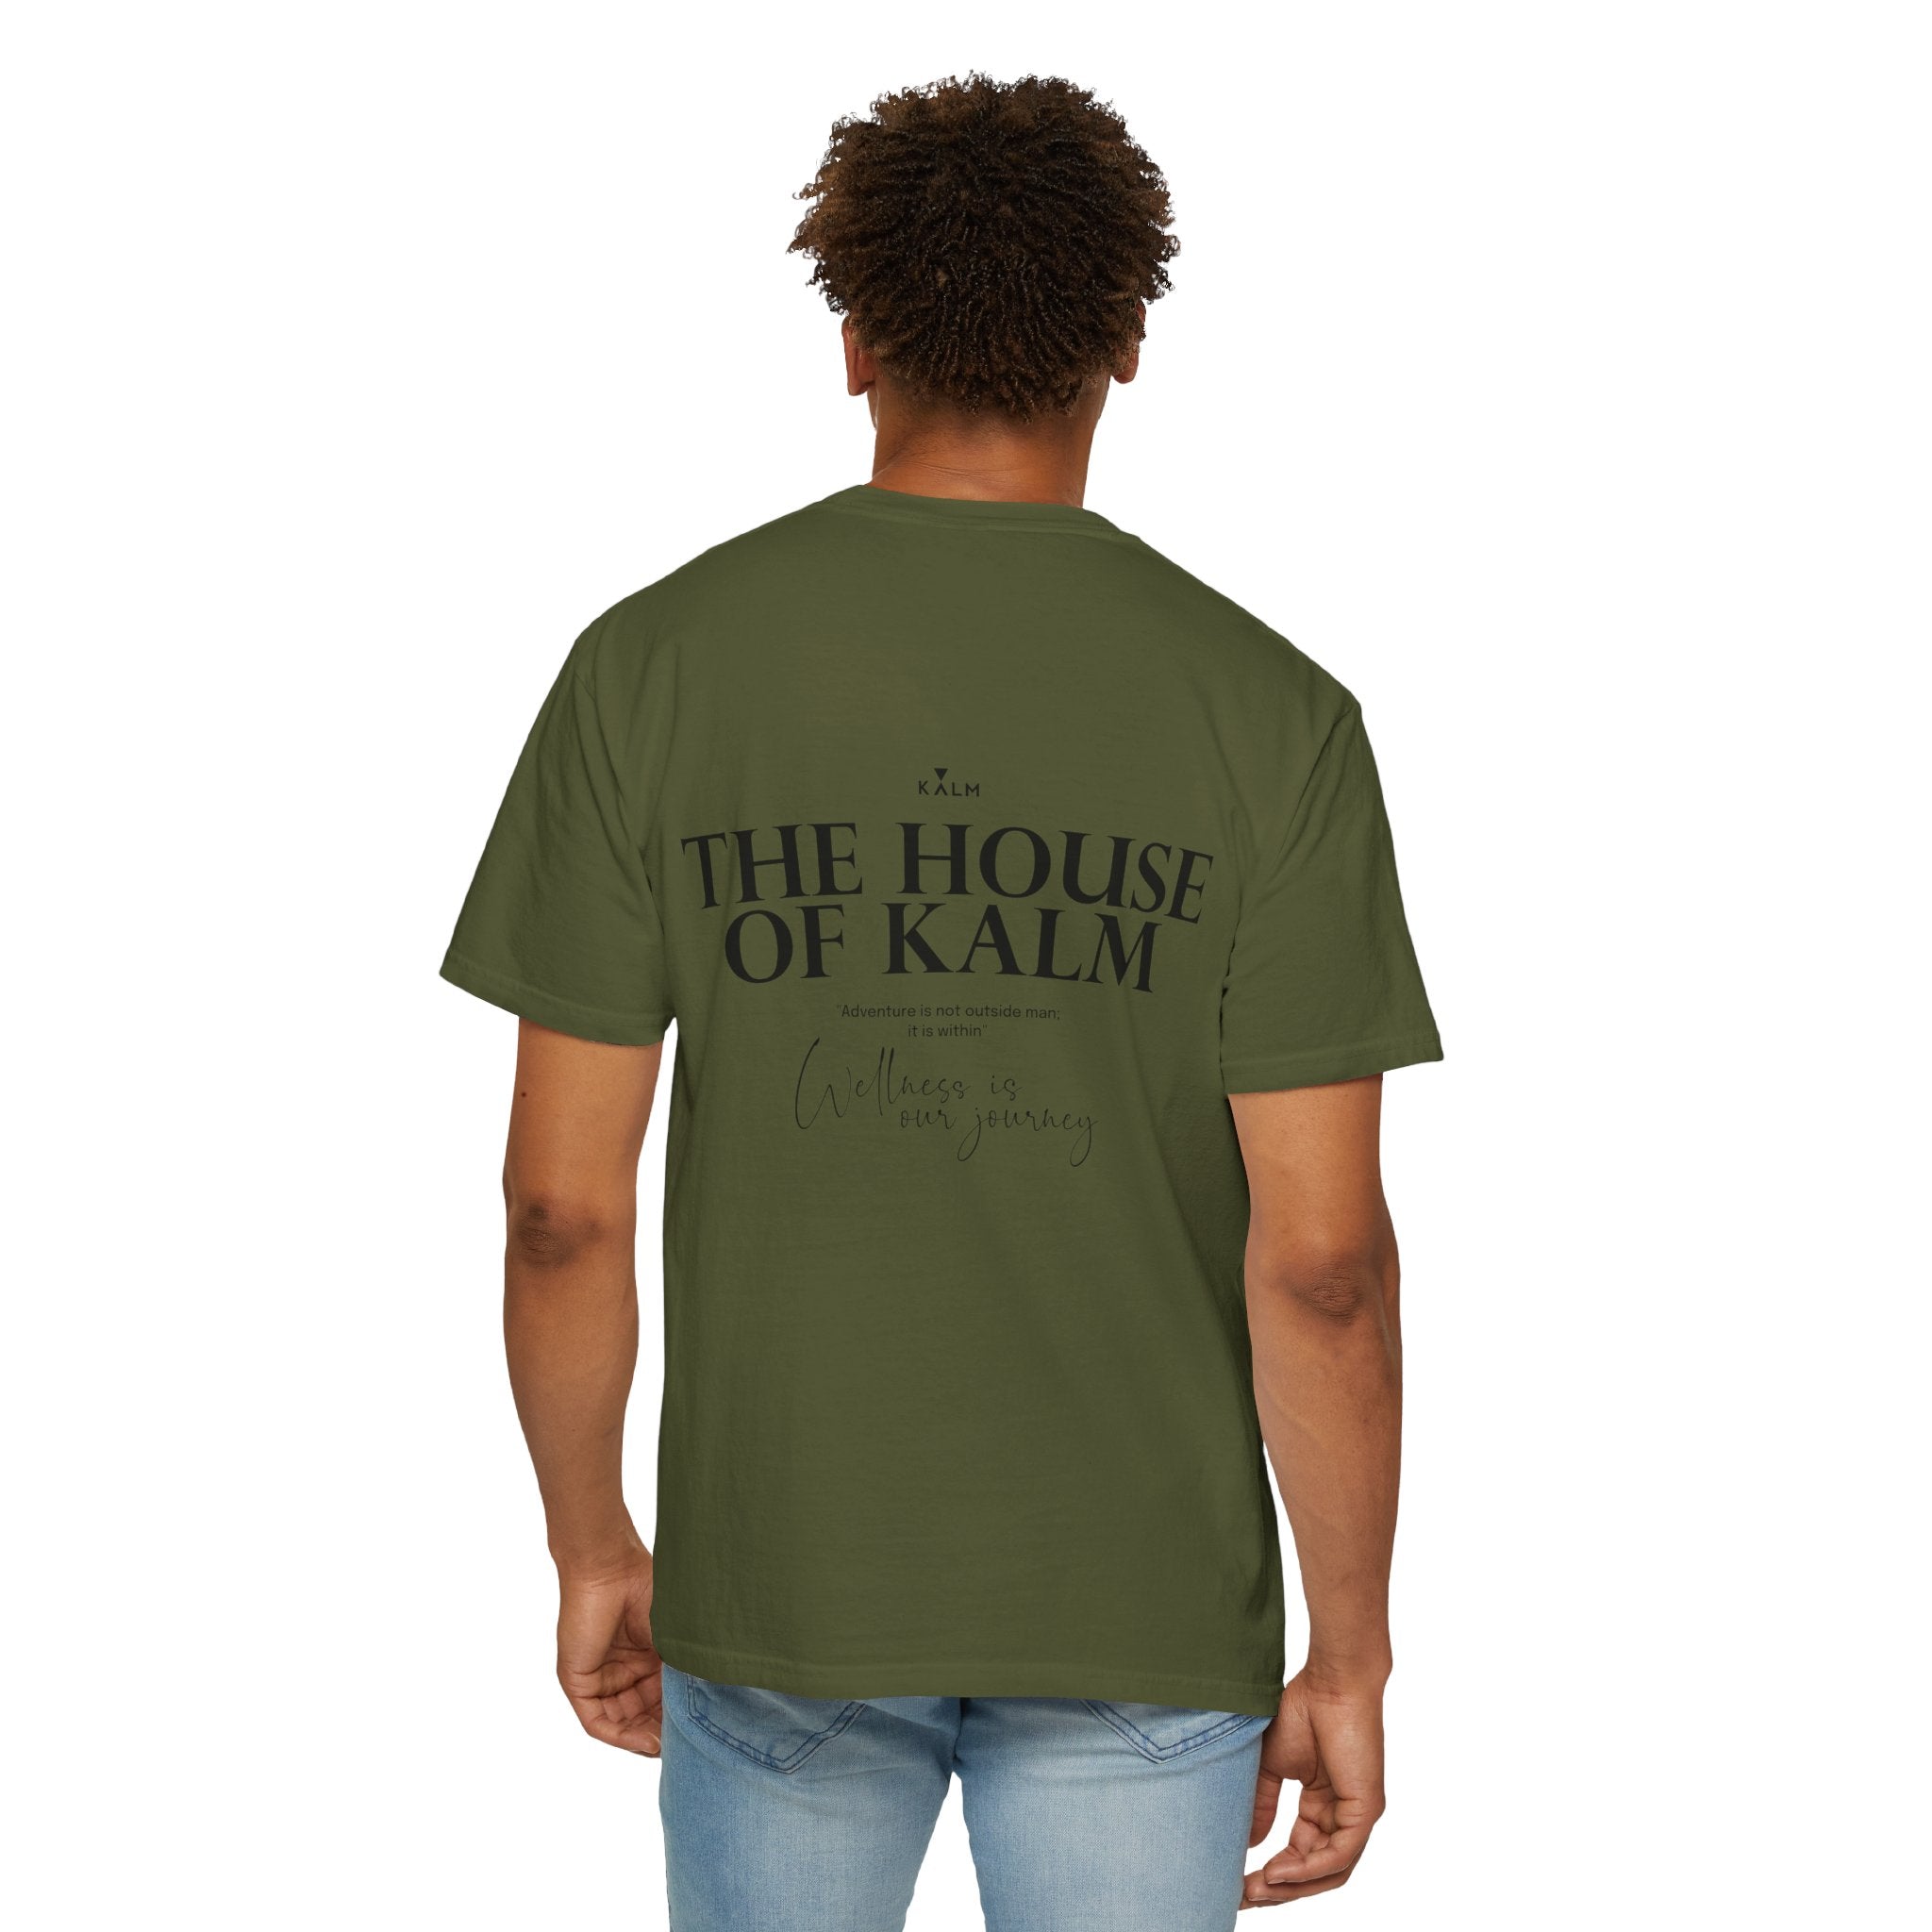 The House of Kalm Garment-Dyed T-shirt